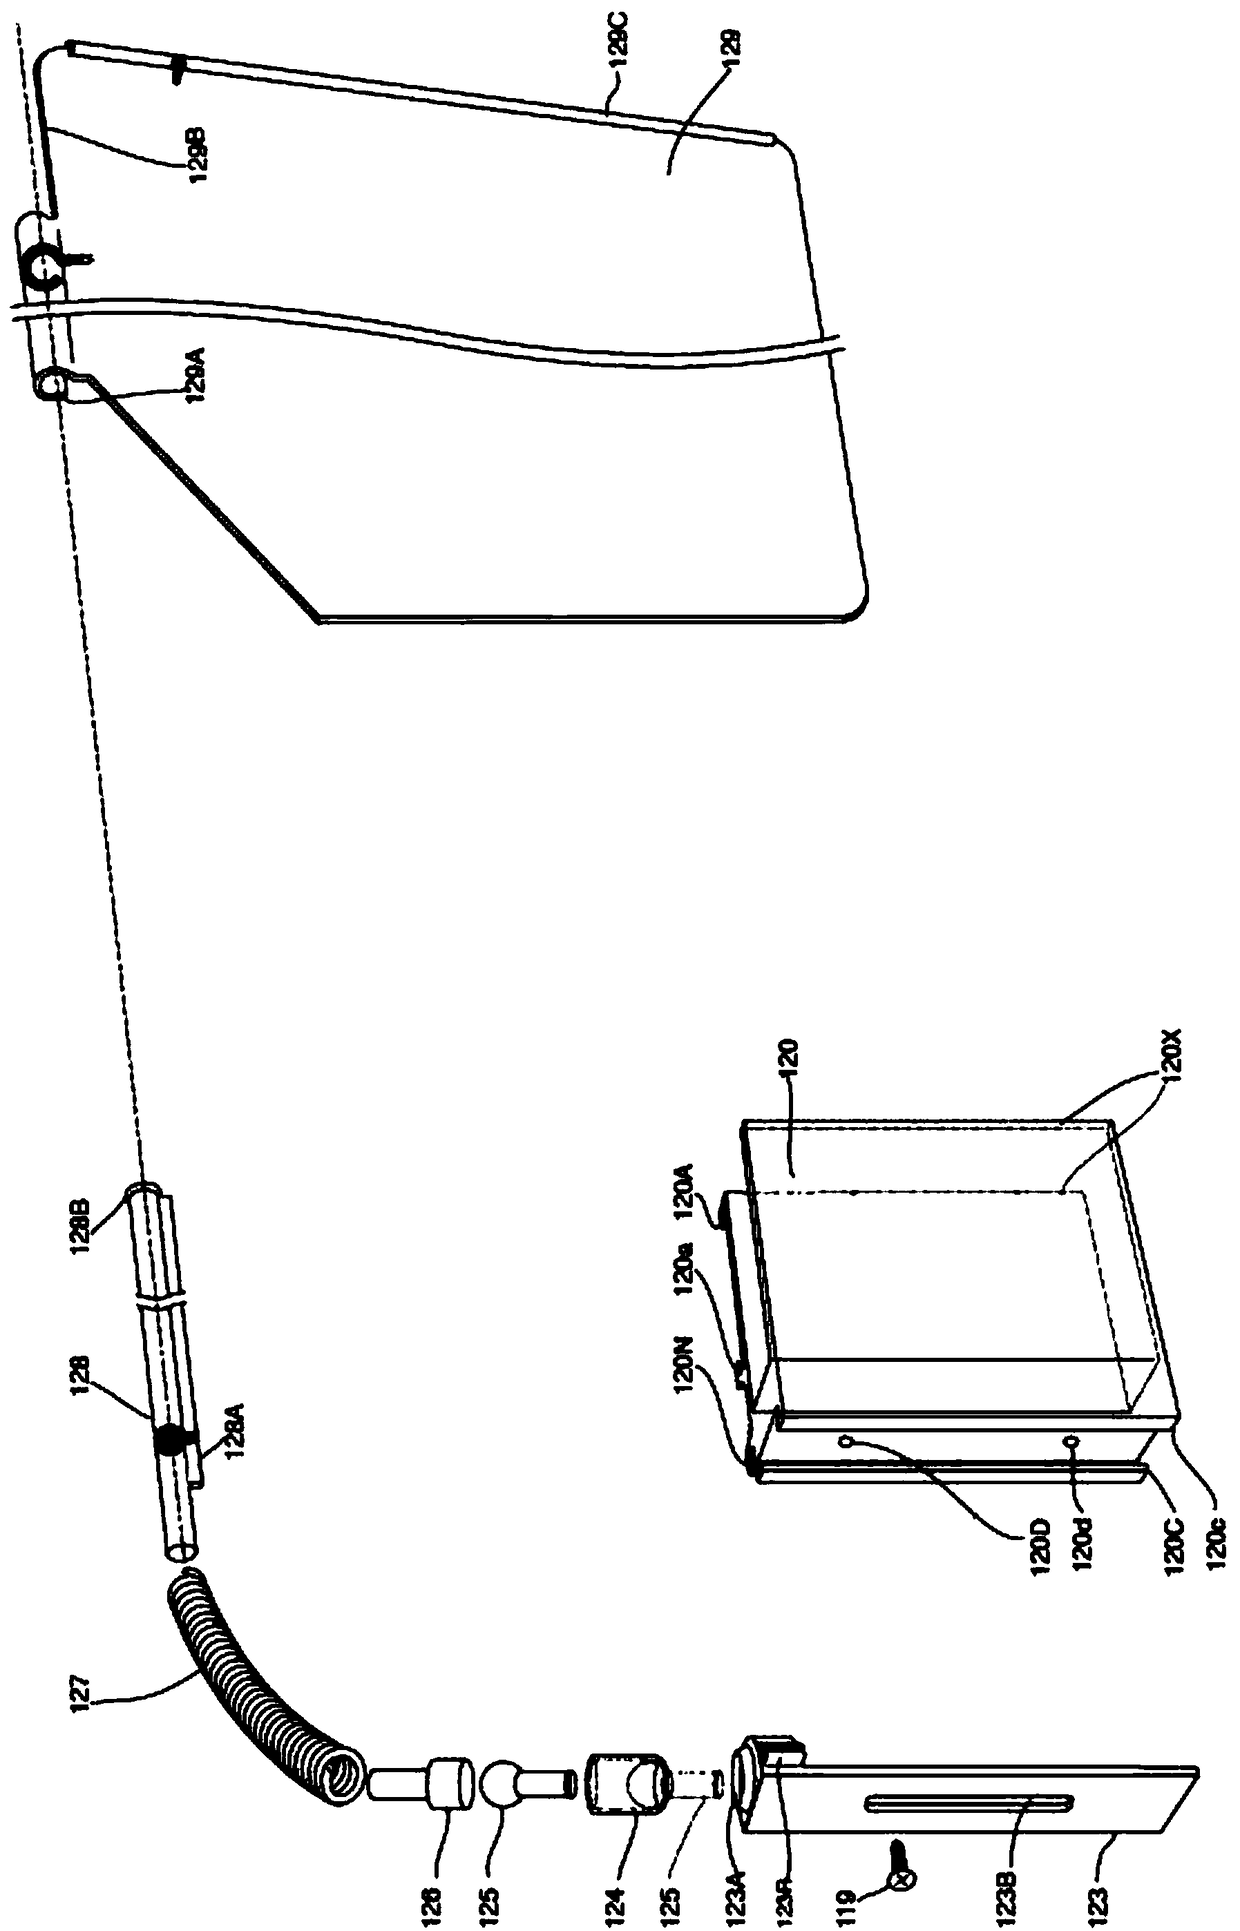 Auxiliary solar protection device